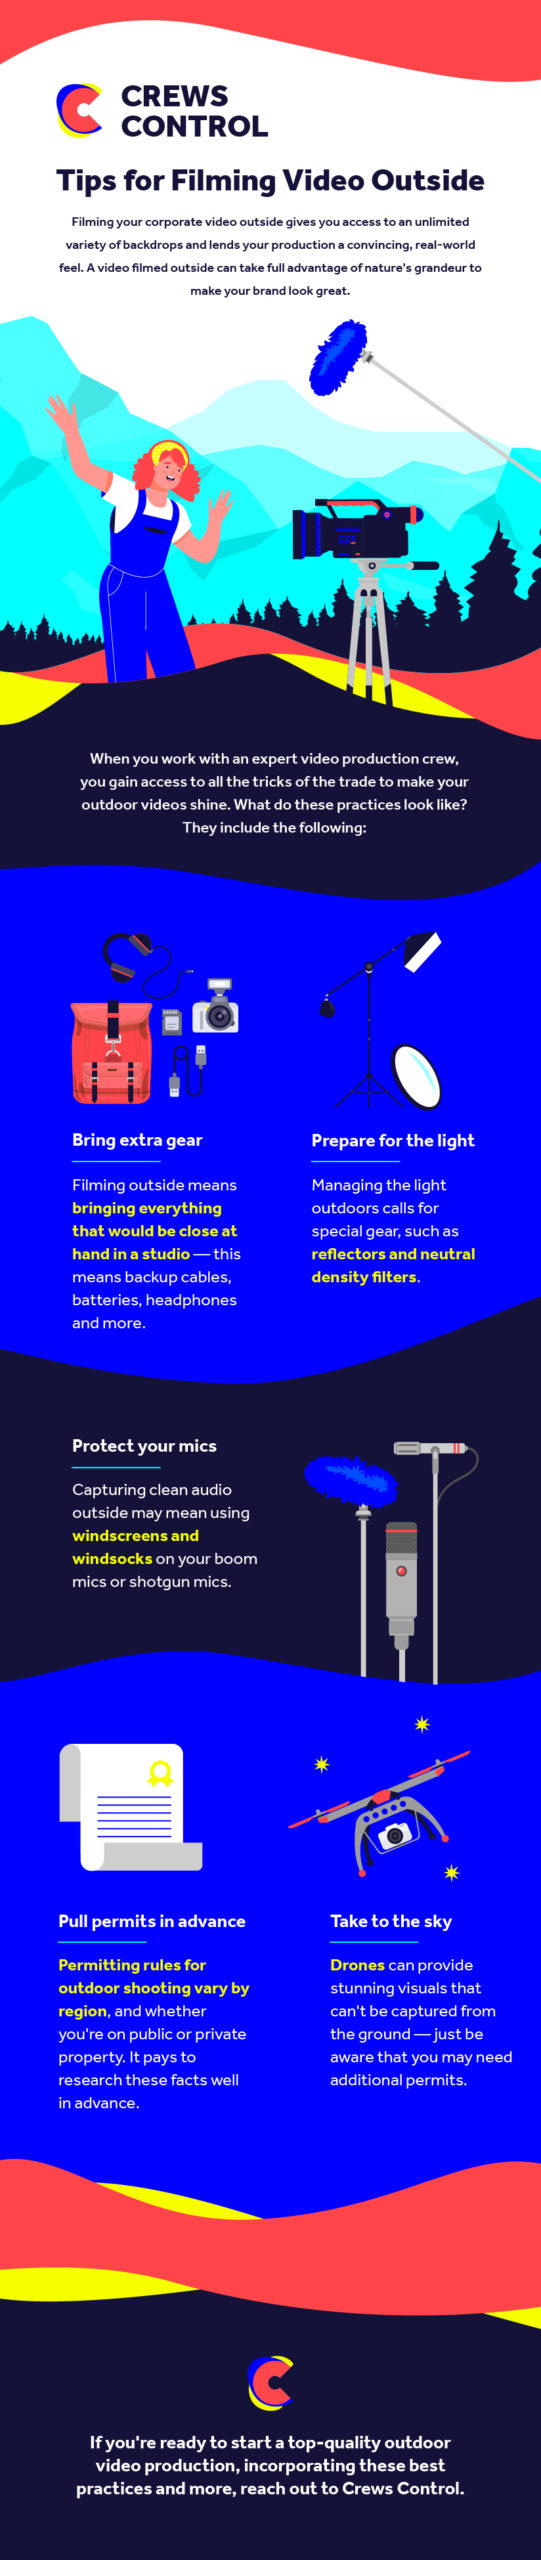 Infographic: Tips For Filming Video Outside - Crews Control